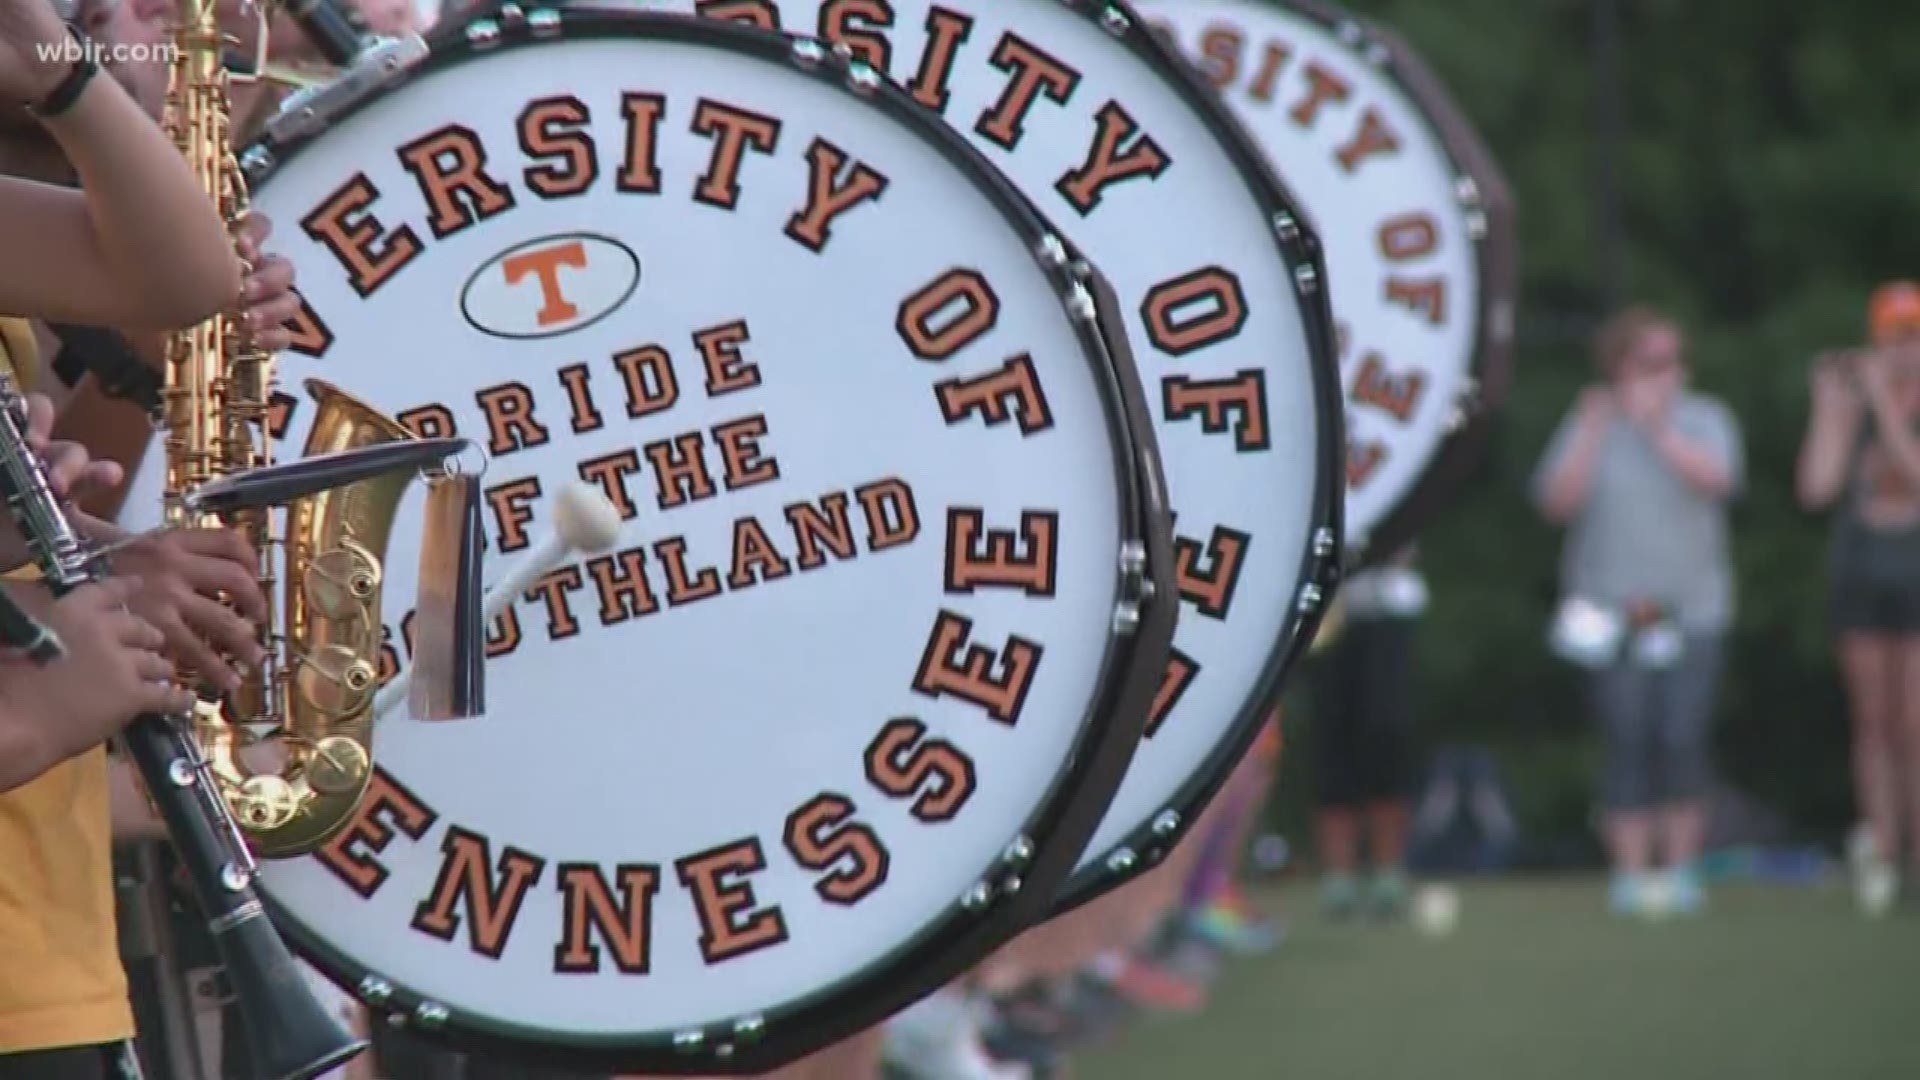 The Pride of the Southland Marching Band is inviting the public to their practice Friday morning at Neyland.